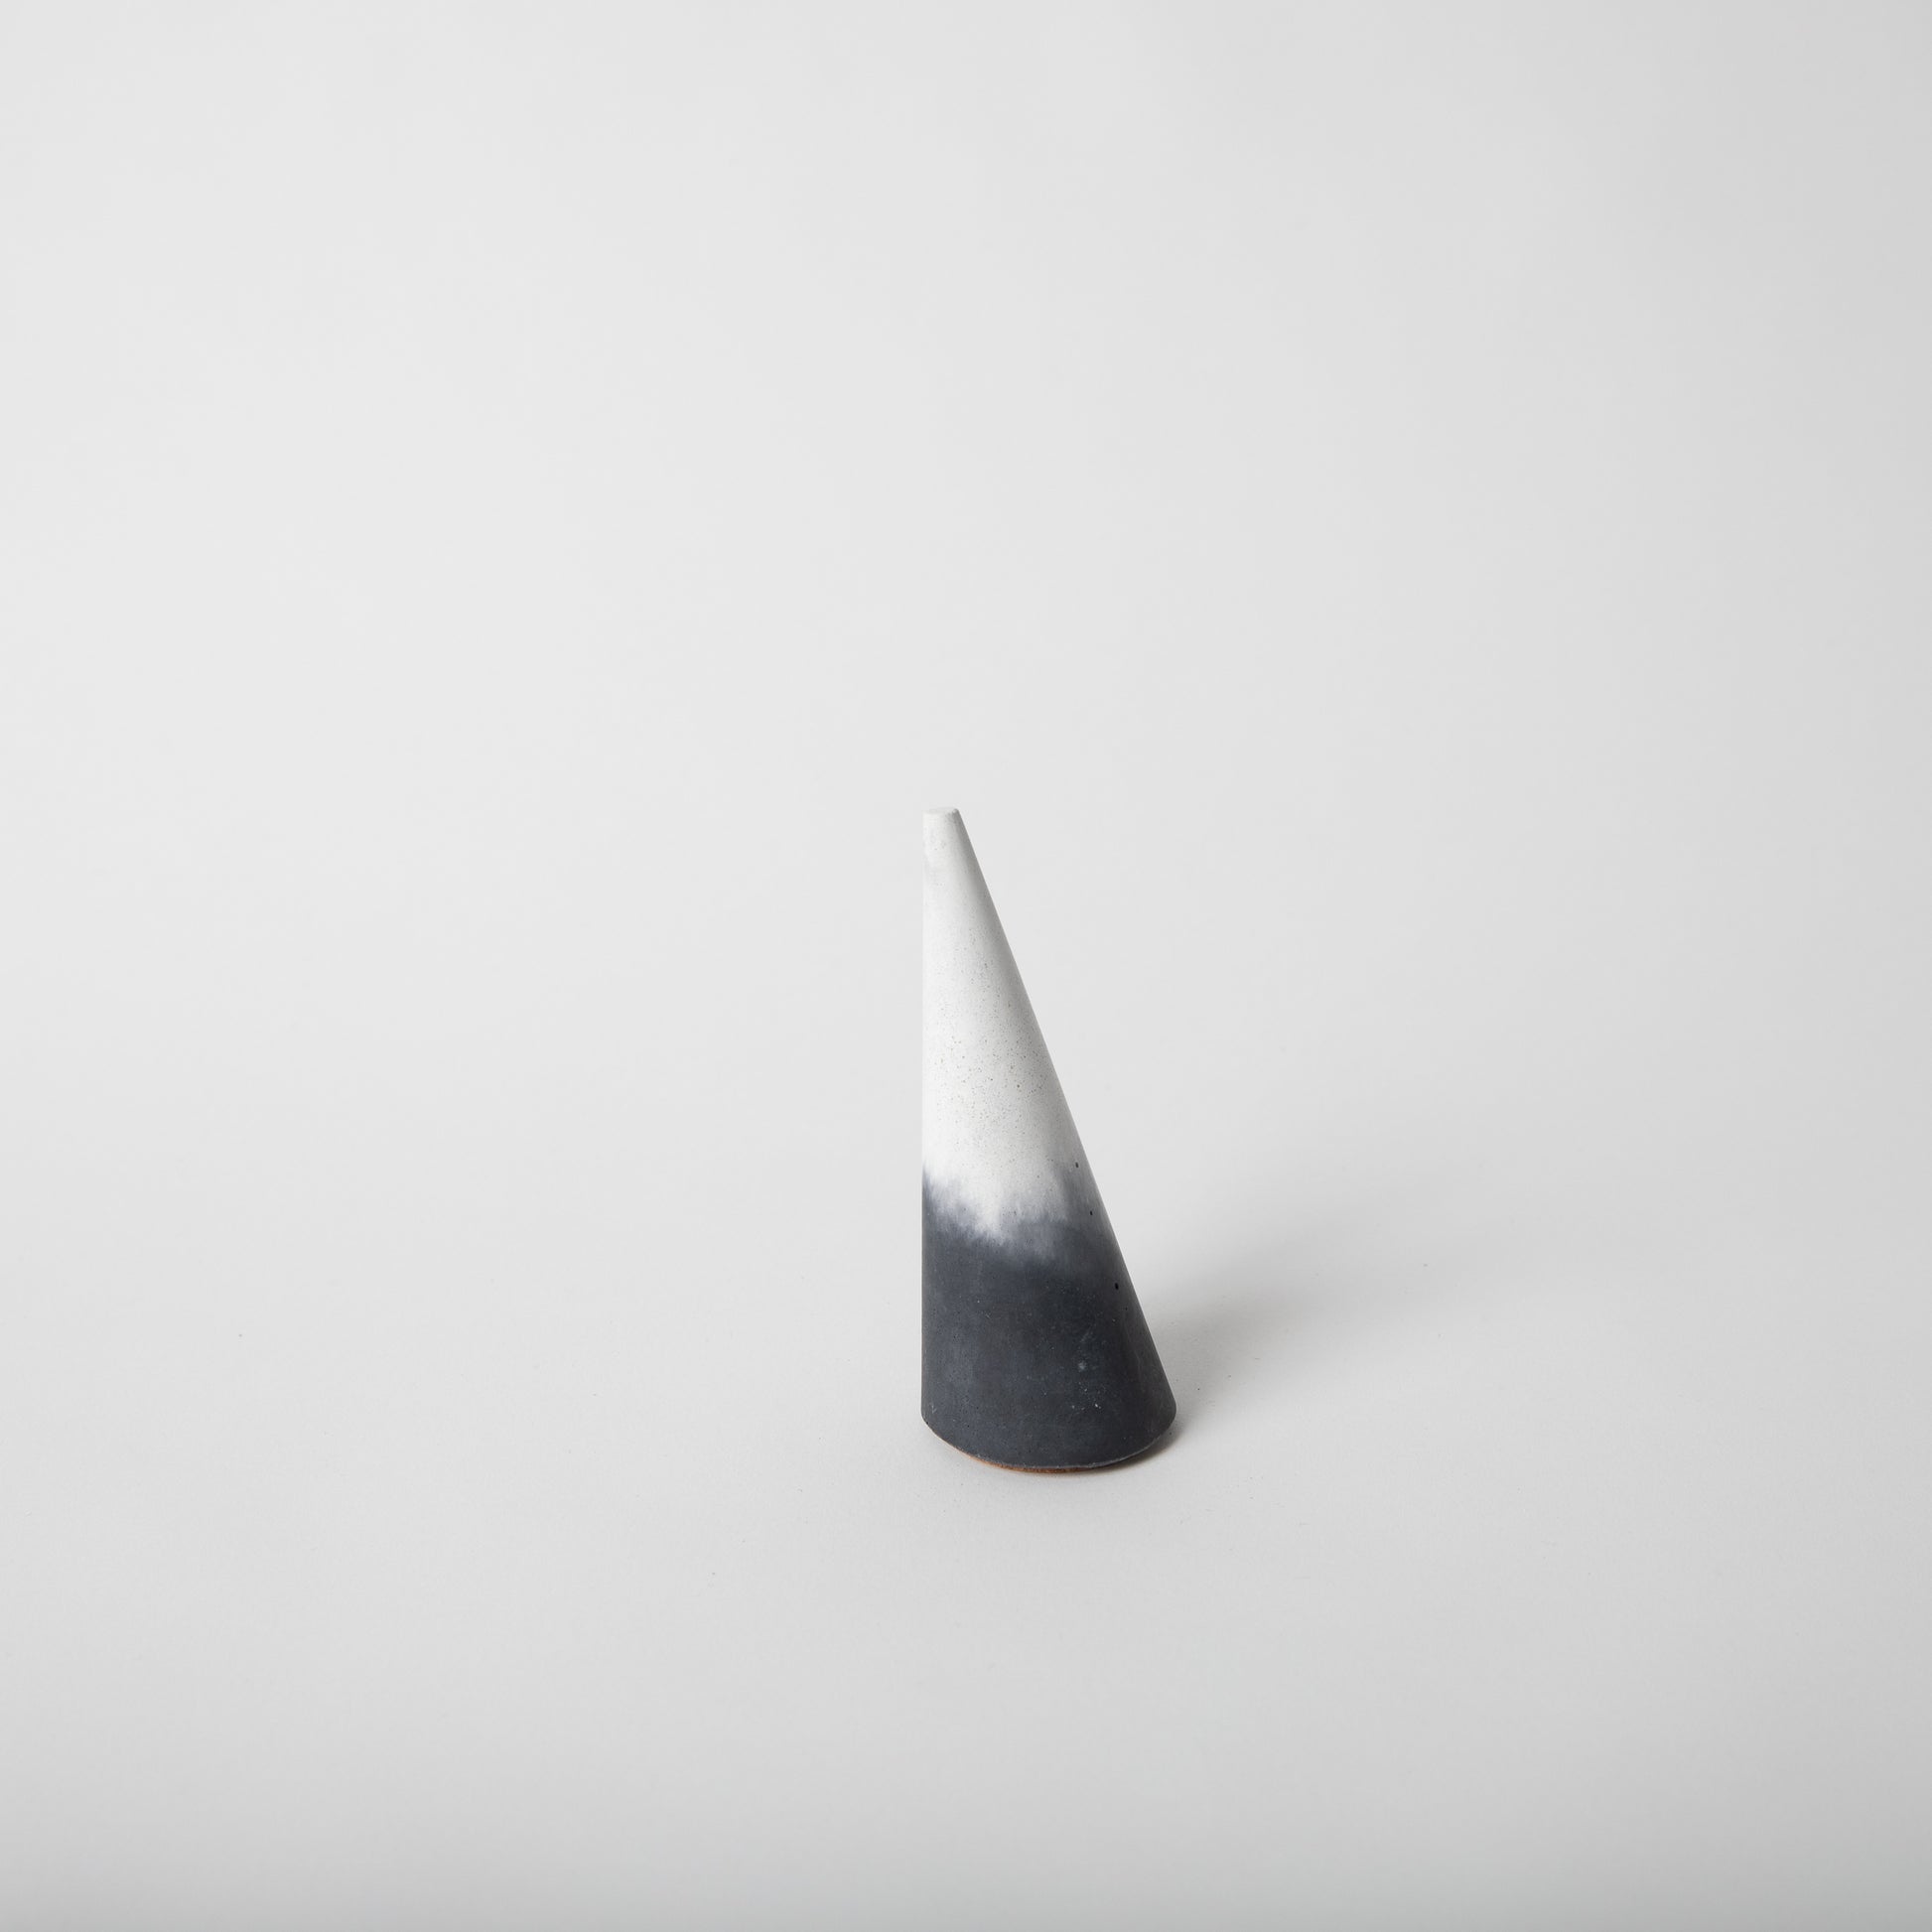 Cone shaped concrete ring holder with cork base in black and white.